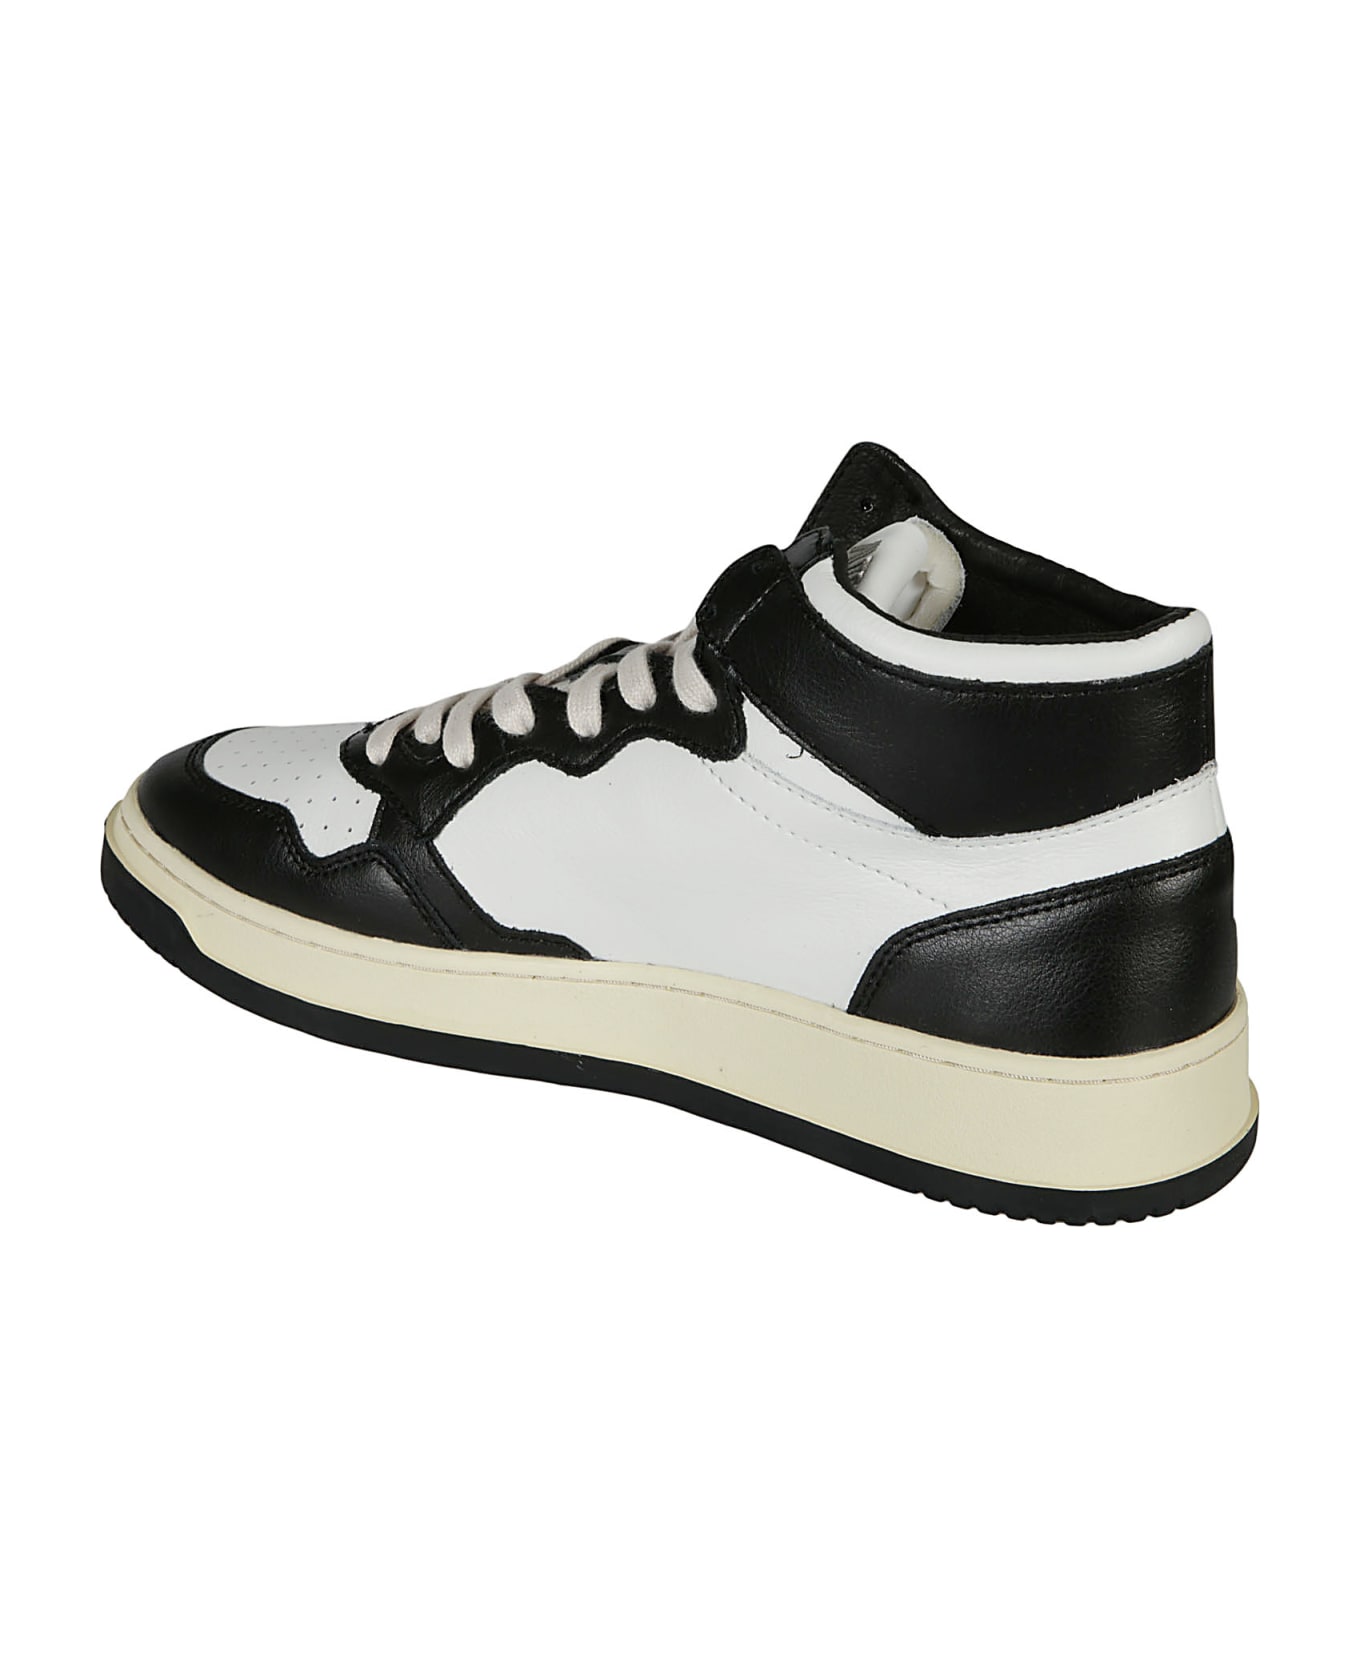 Autry Medalist Mid Leather Sneakers - Leat wht/bk スニーカー